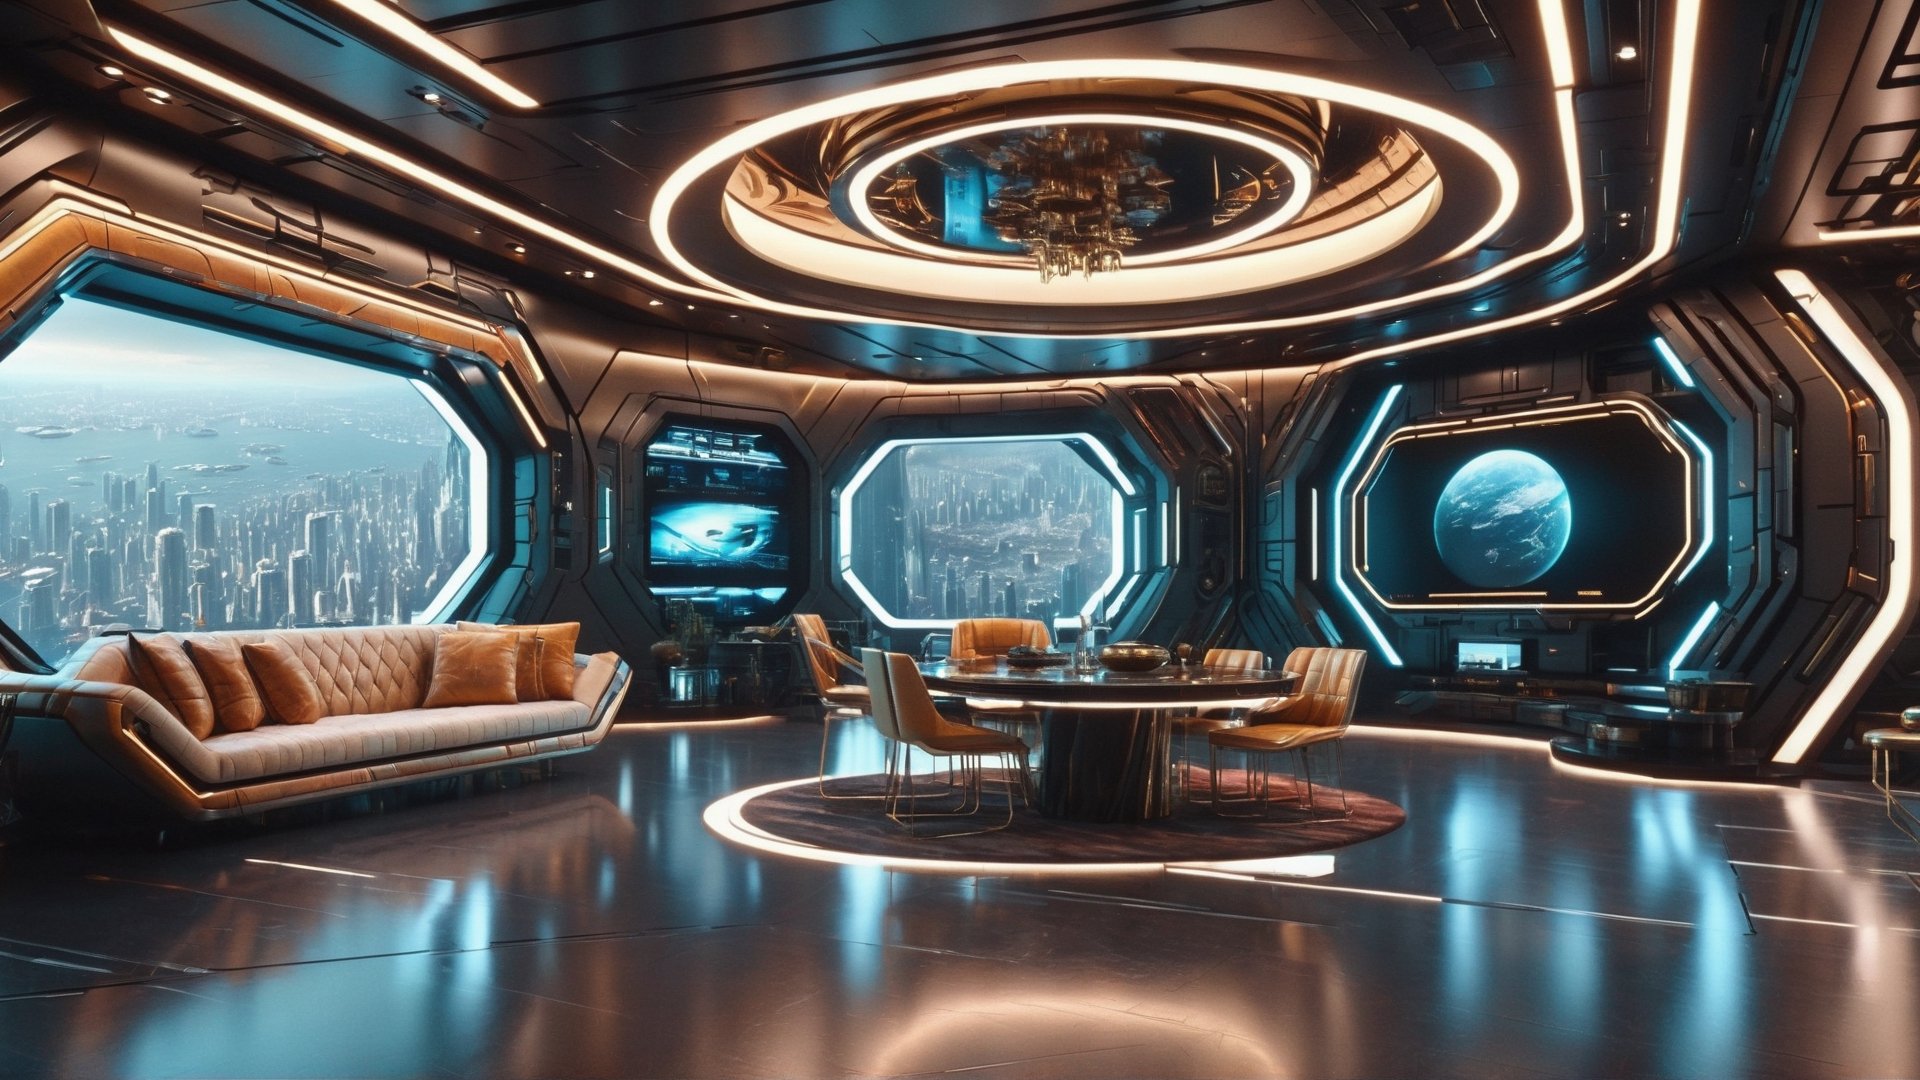 Masterpiece, ultra high definition, ultra high quality, 8k, exquisite details,
Space station, extra large floor-to-ceiling windows, future technology, intricate light, future luxury furniture, cyberpunk, outer space background, planets, galaxies,